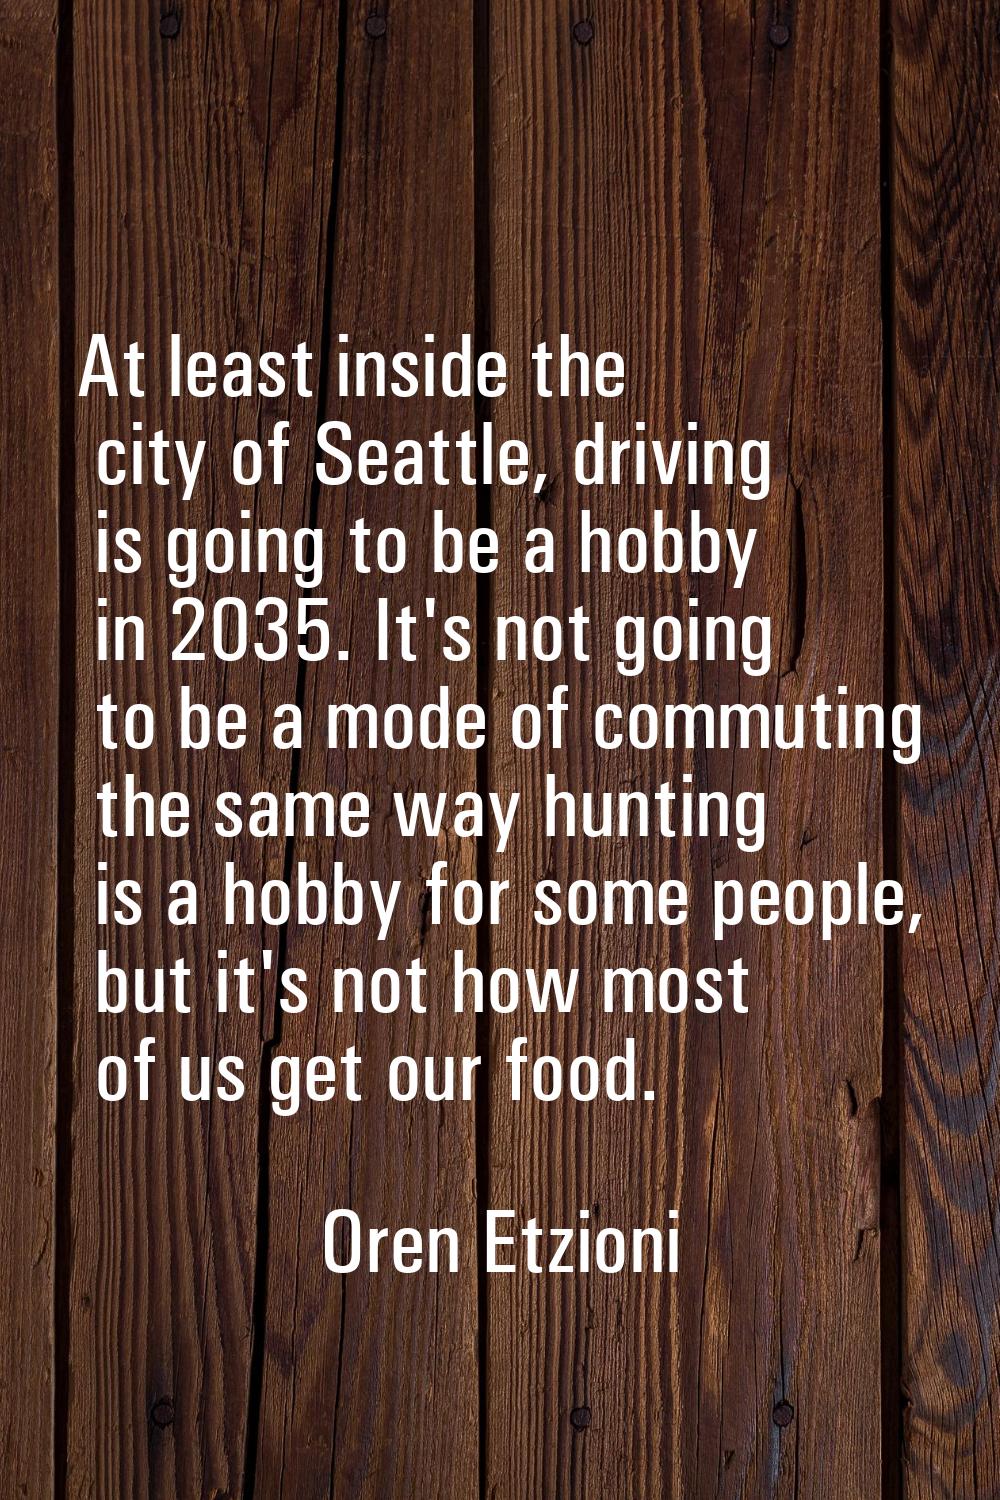 At least inside the city of Seattle, driving is going to be a hobby in 2035. It's not going to be a